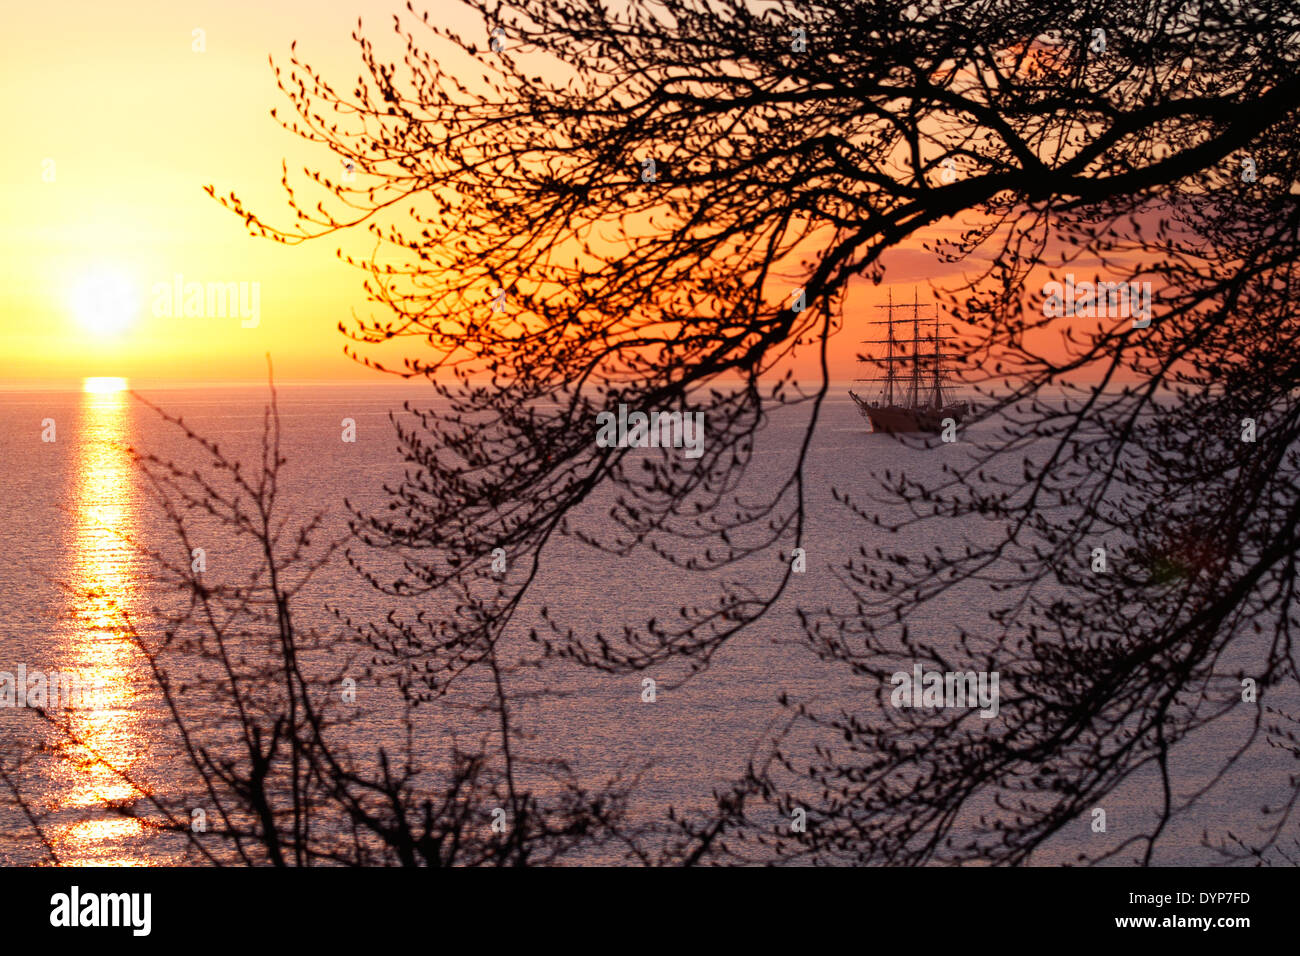 Georg Stage, a three-masted full-rigged Danish training tall ship in sunrise in the Sound in Denmark. A spring morning seen through branches and twigs Stock Photo